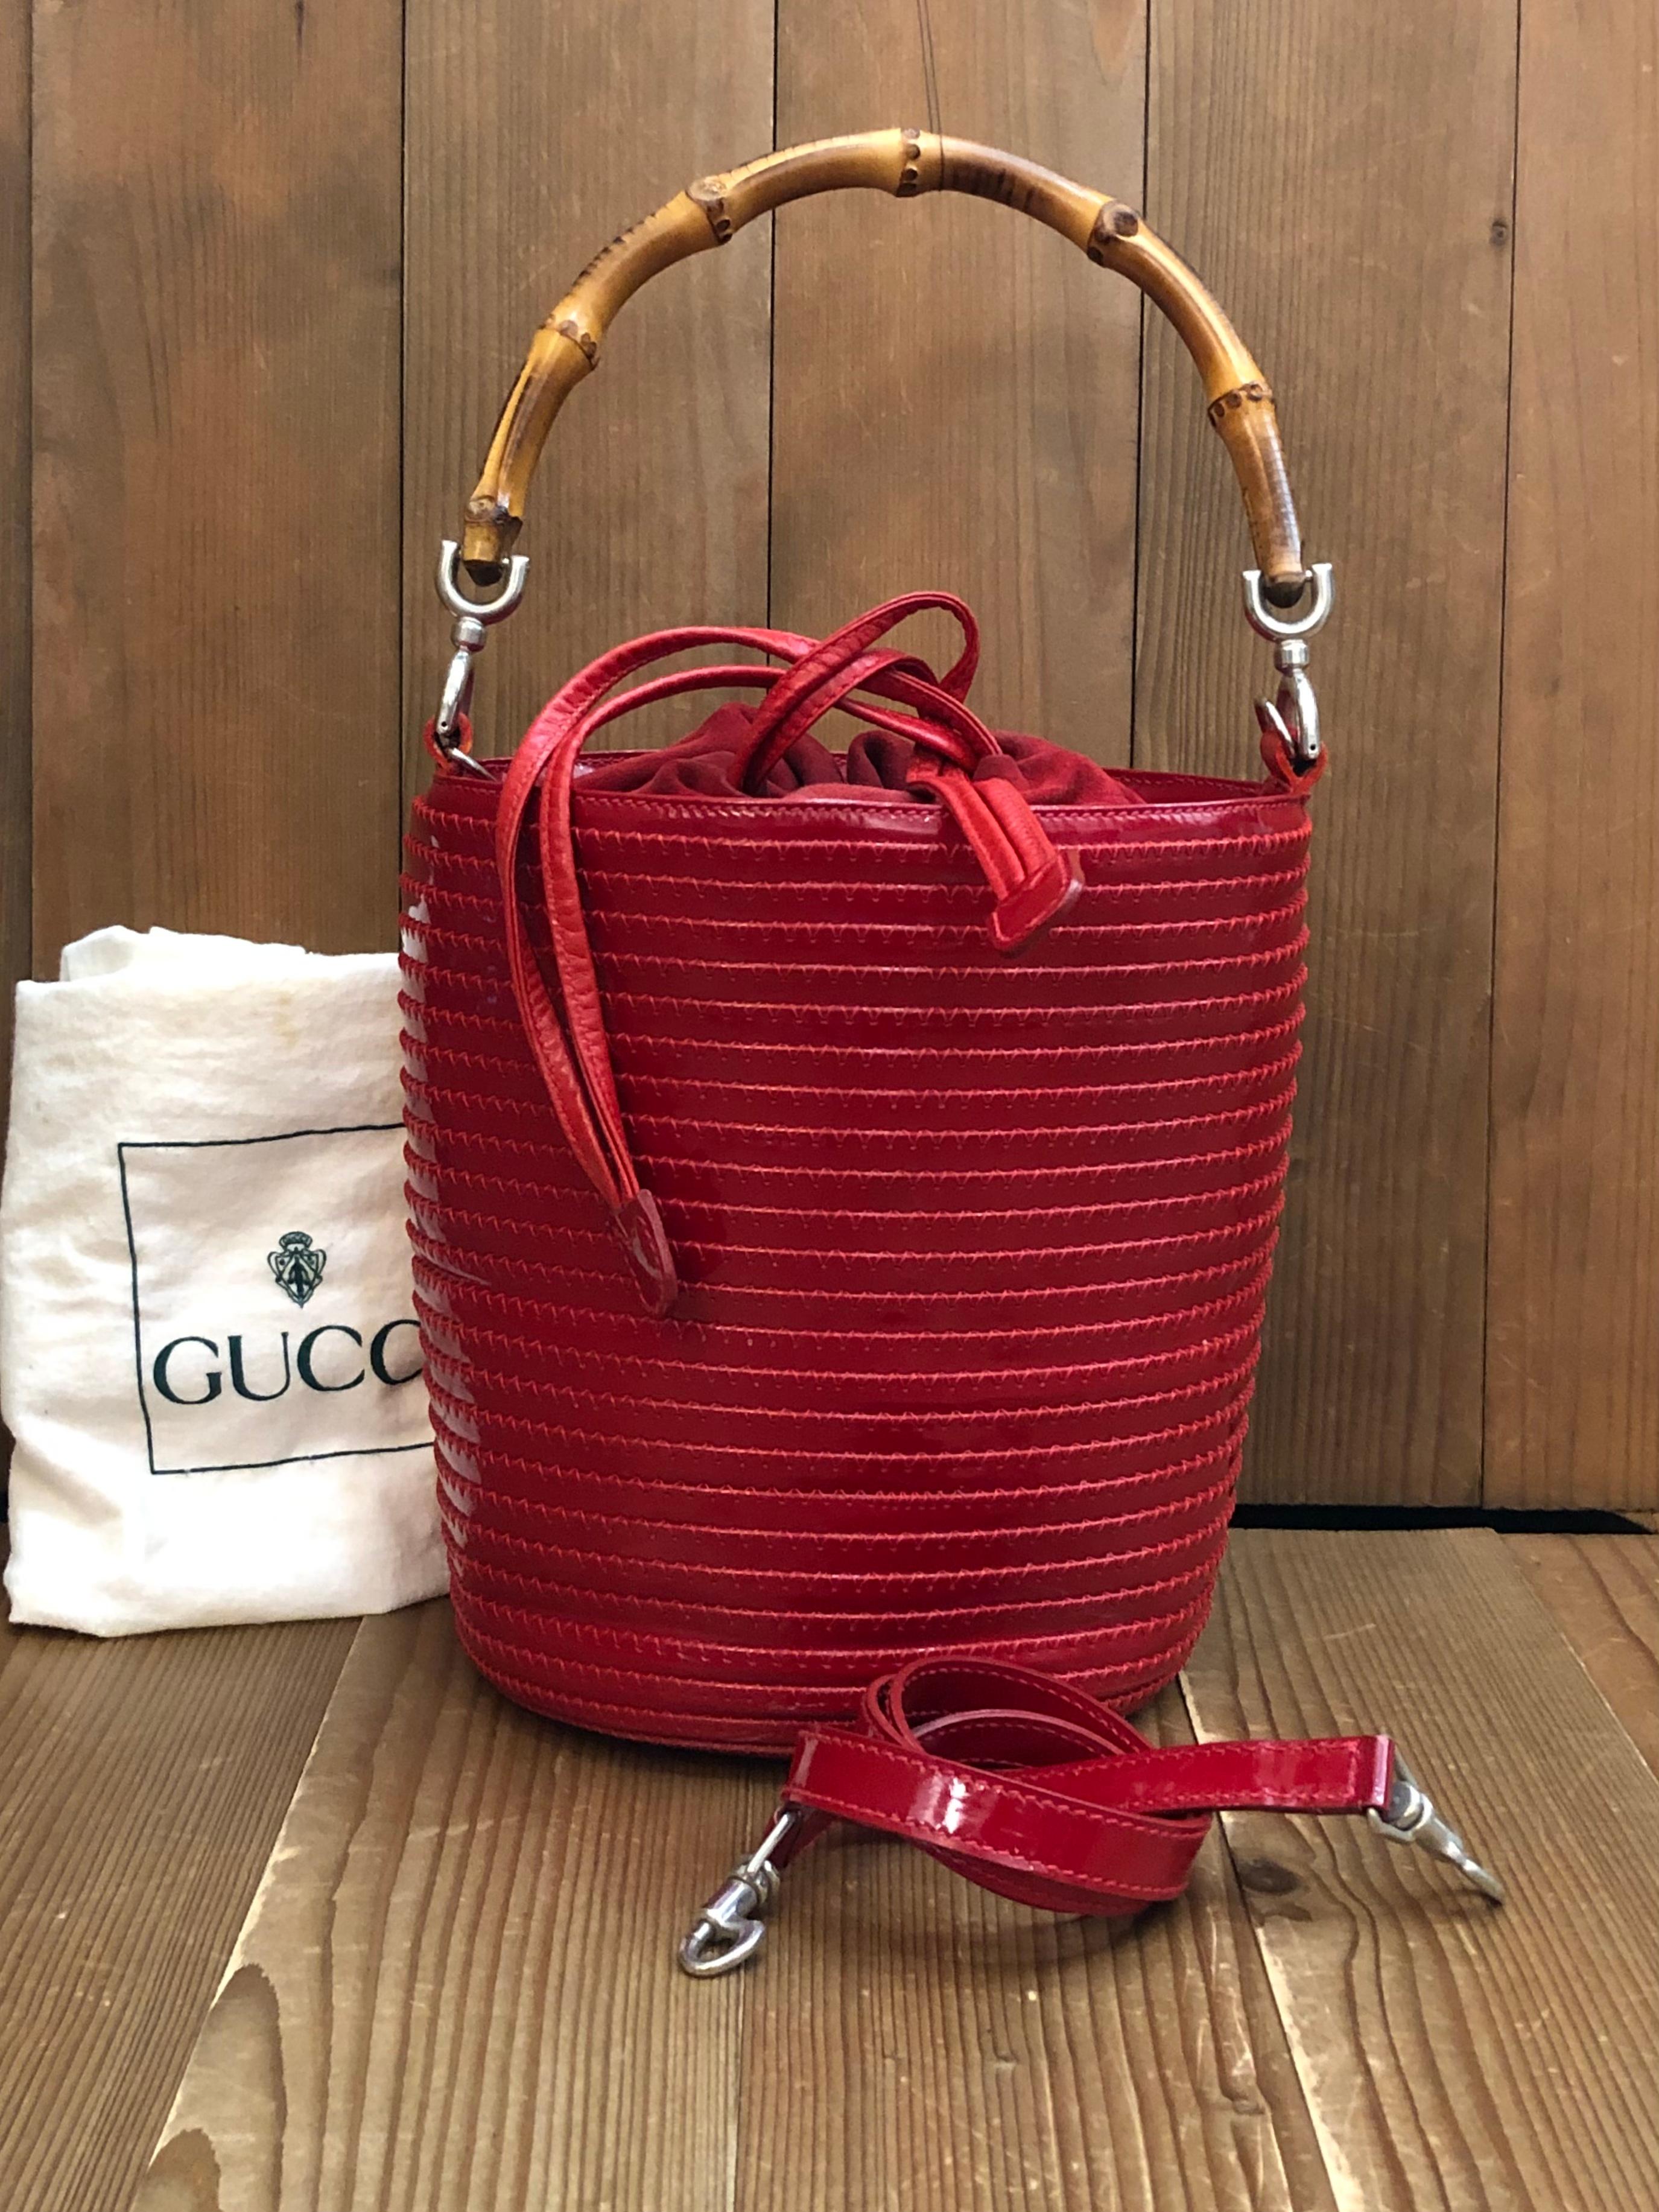 This vintage GUCCI bucket shoulder bag is crafted of red patent leather in folds featuring silver toned hardware and a bamboo handle. Top drawstring in nubuck leather closure opens to a beige leather interior featuring a zippered pocket. Made in